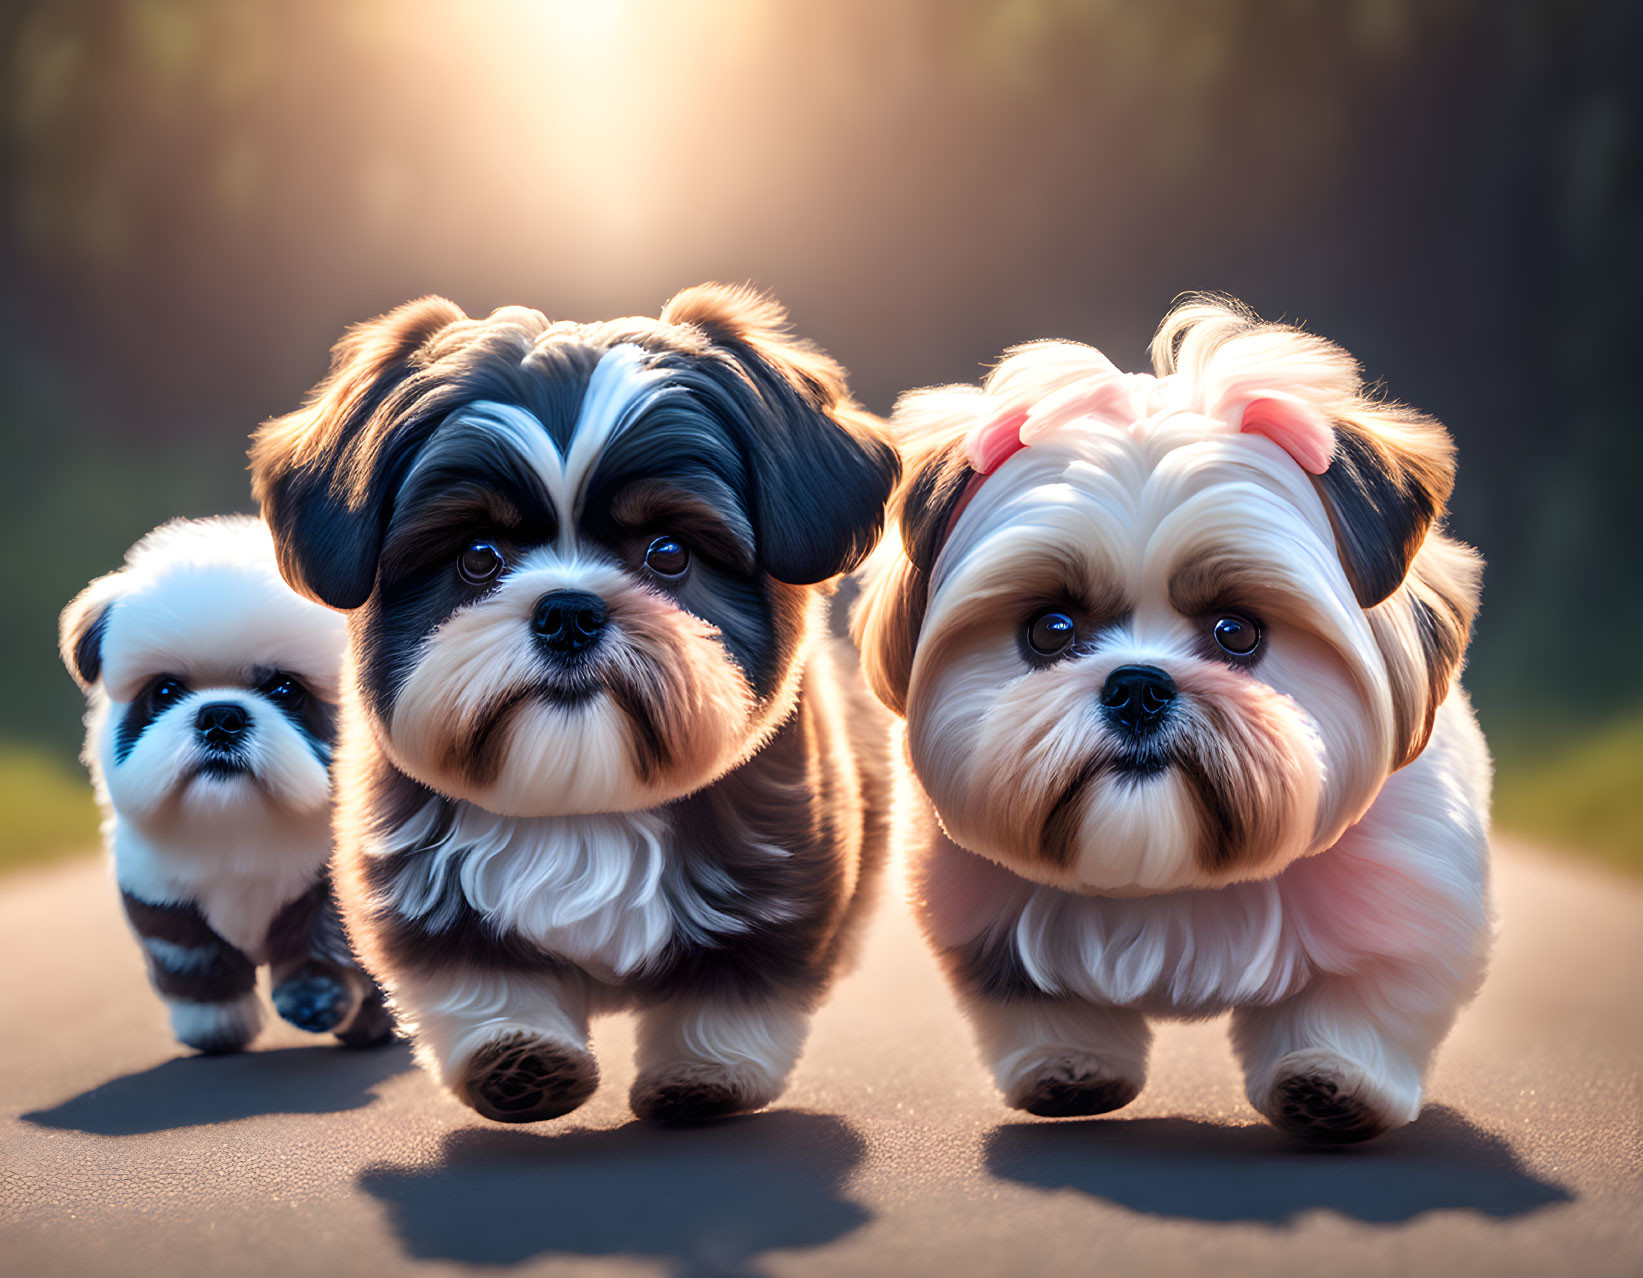 Three Shih Tzu dogs at sunset with bow accessories, one looking at the camera